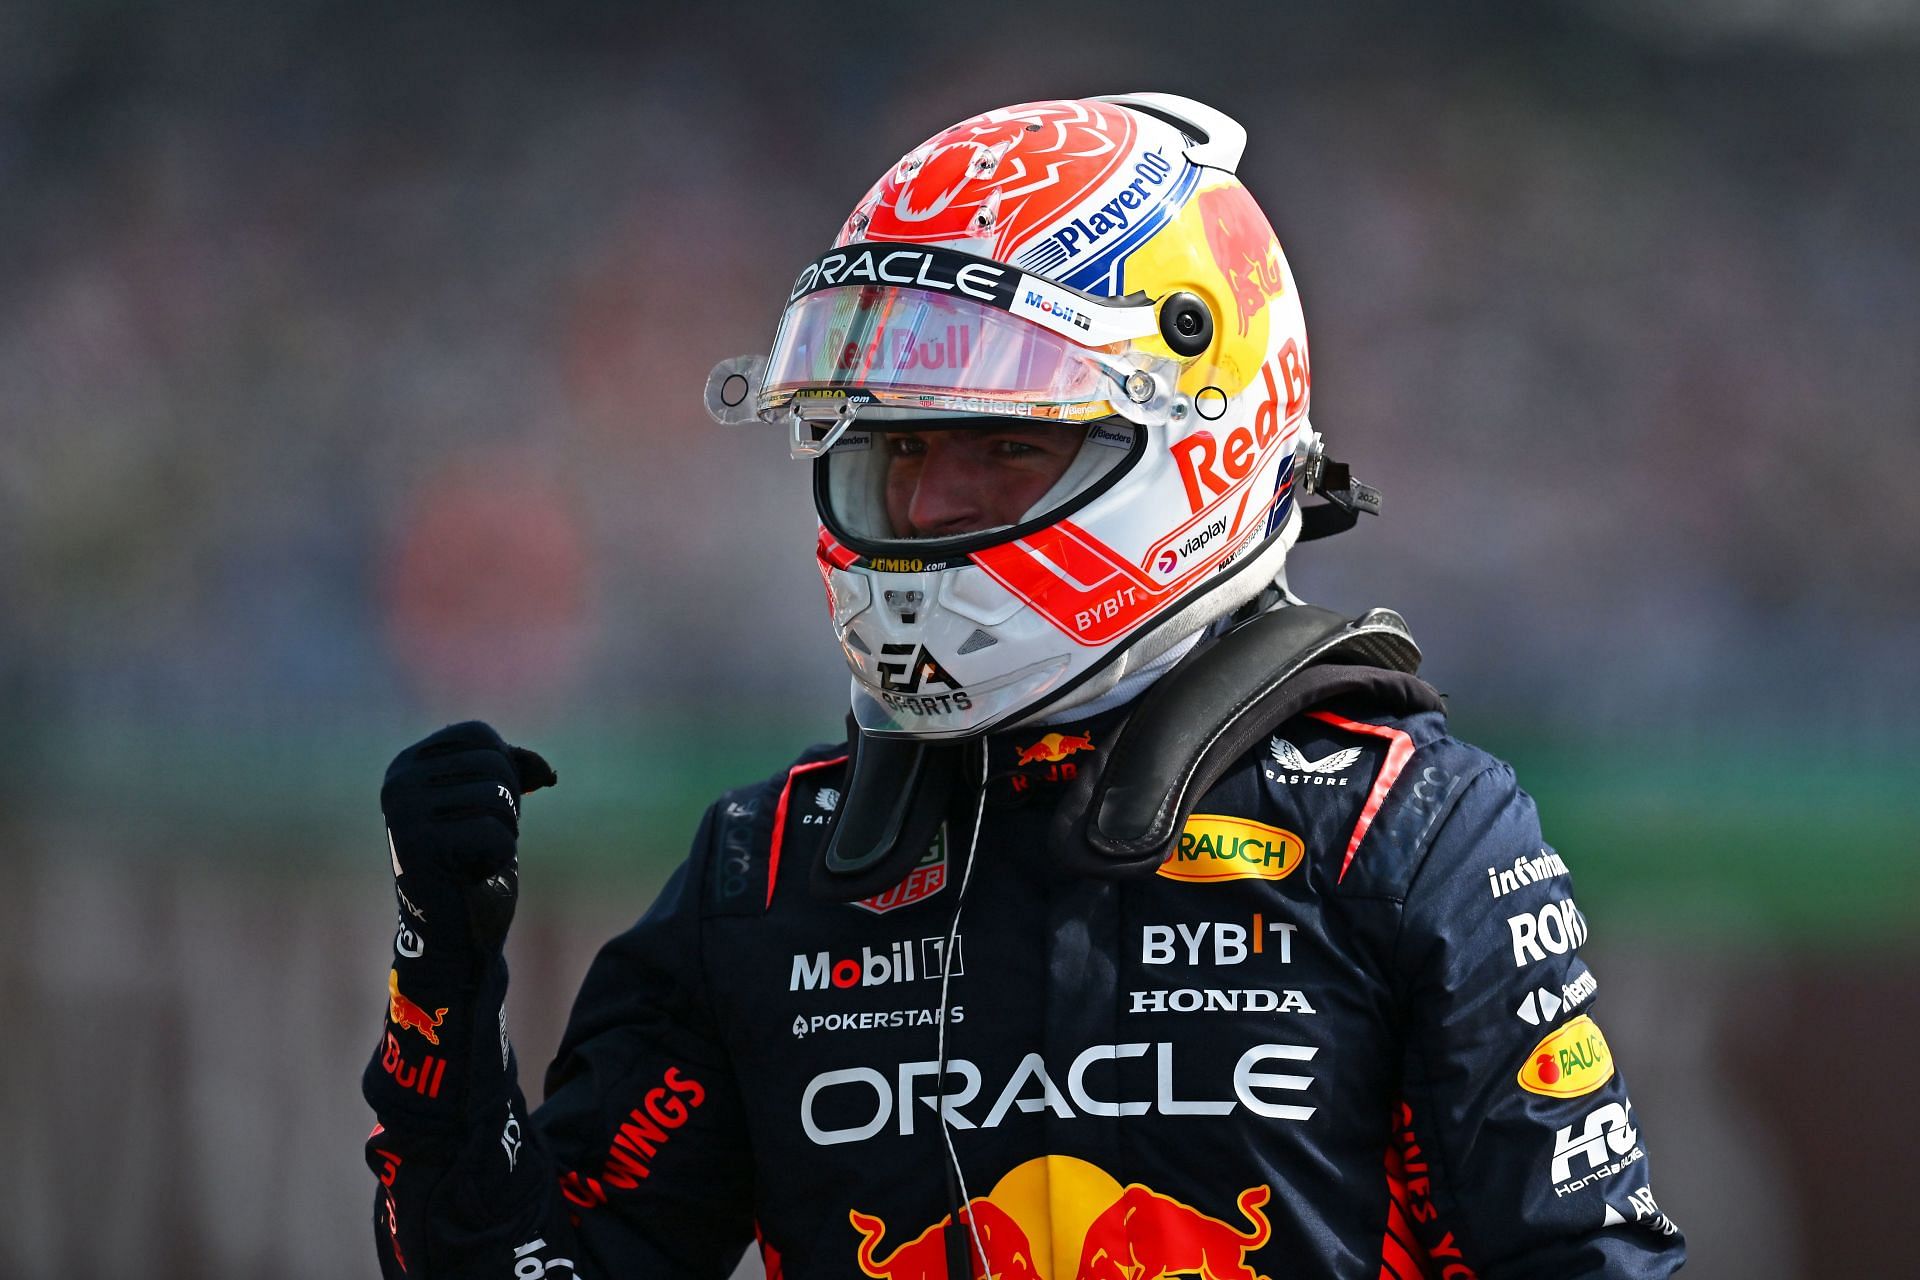 “I was quite surprised to see them 2 there”: Pole-sitter Max Verstappen ...